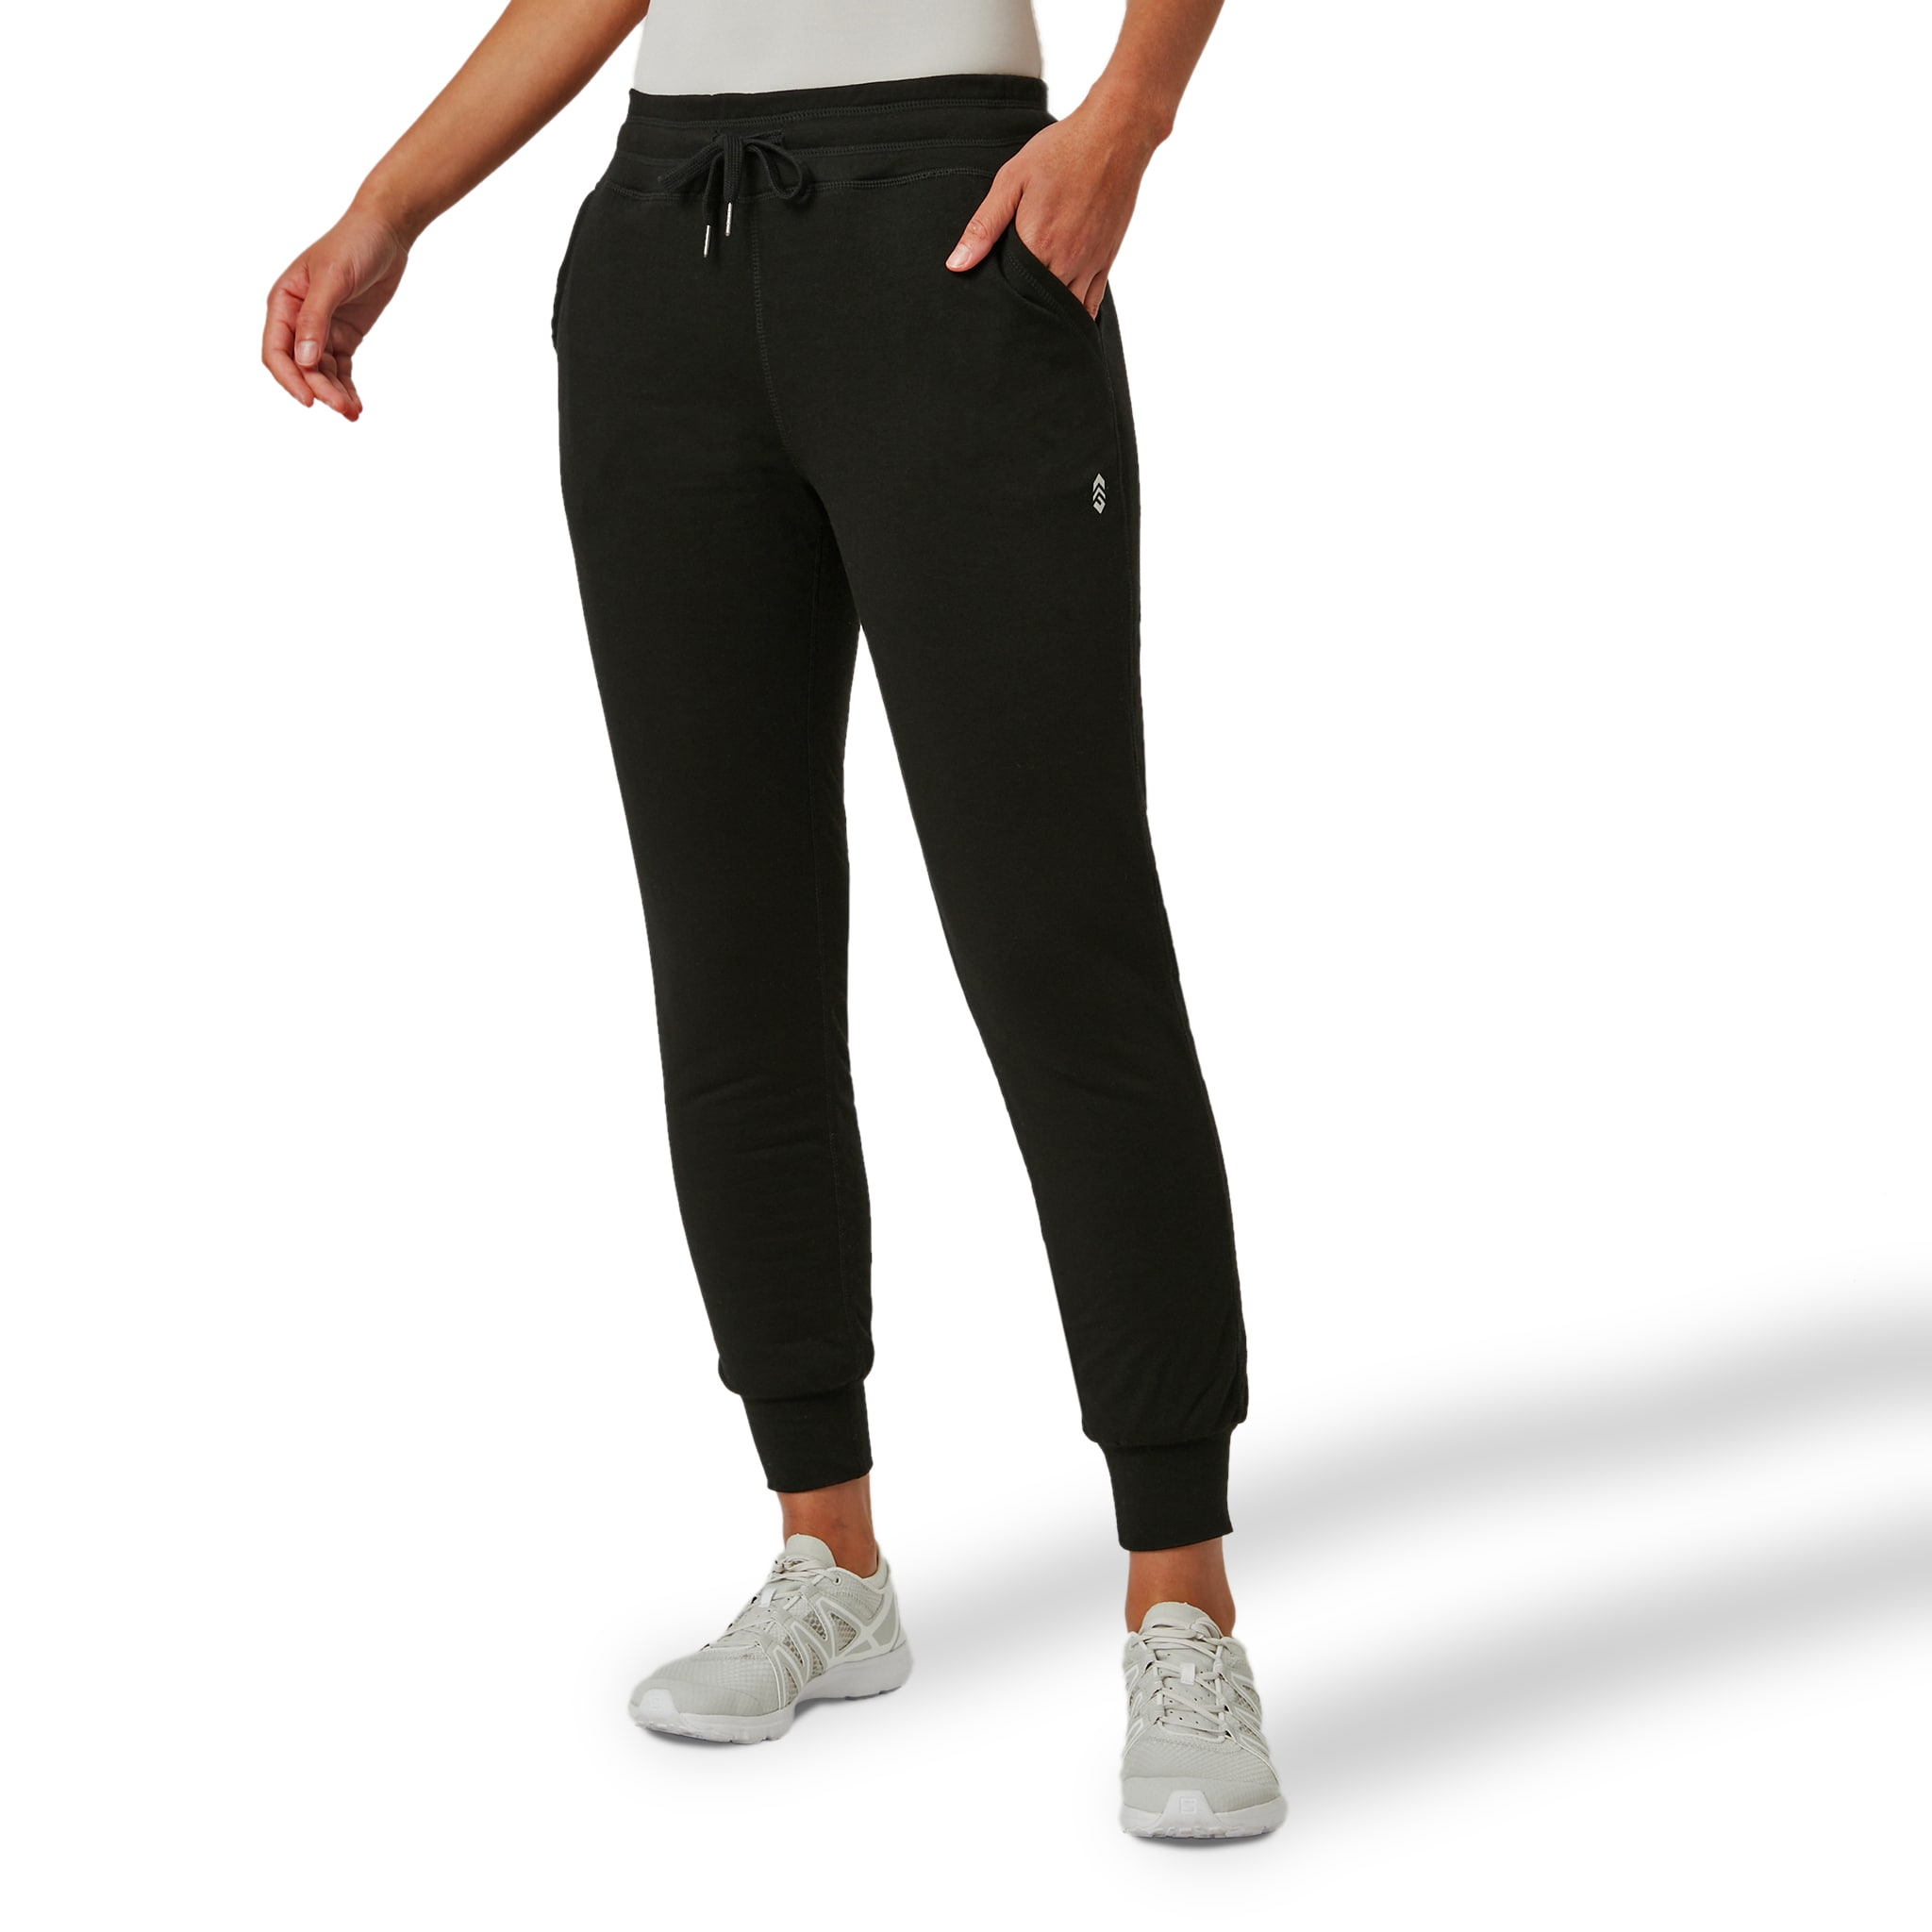 Free Country Women's Luxe Jogger Black S - Multi Color/Finish - Small Size  - Polyester - Water Resistant - Machine Washable - Warm, Comfortable,  High-Quality at